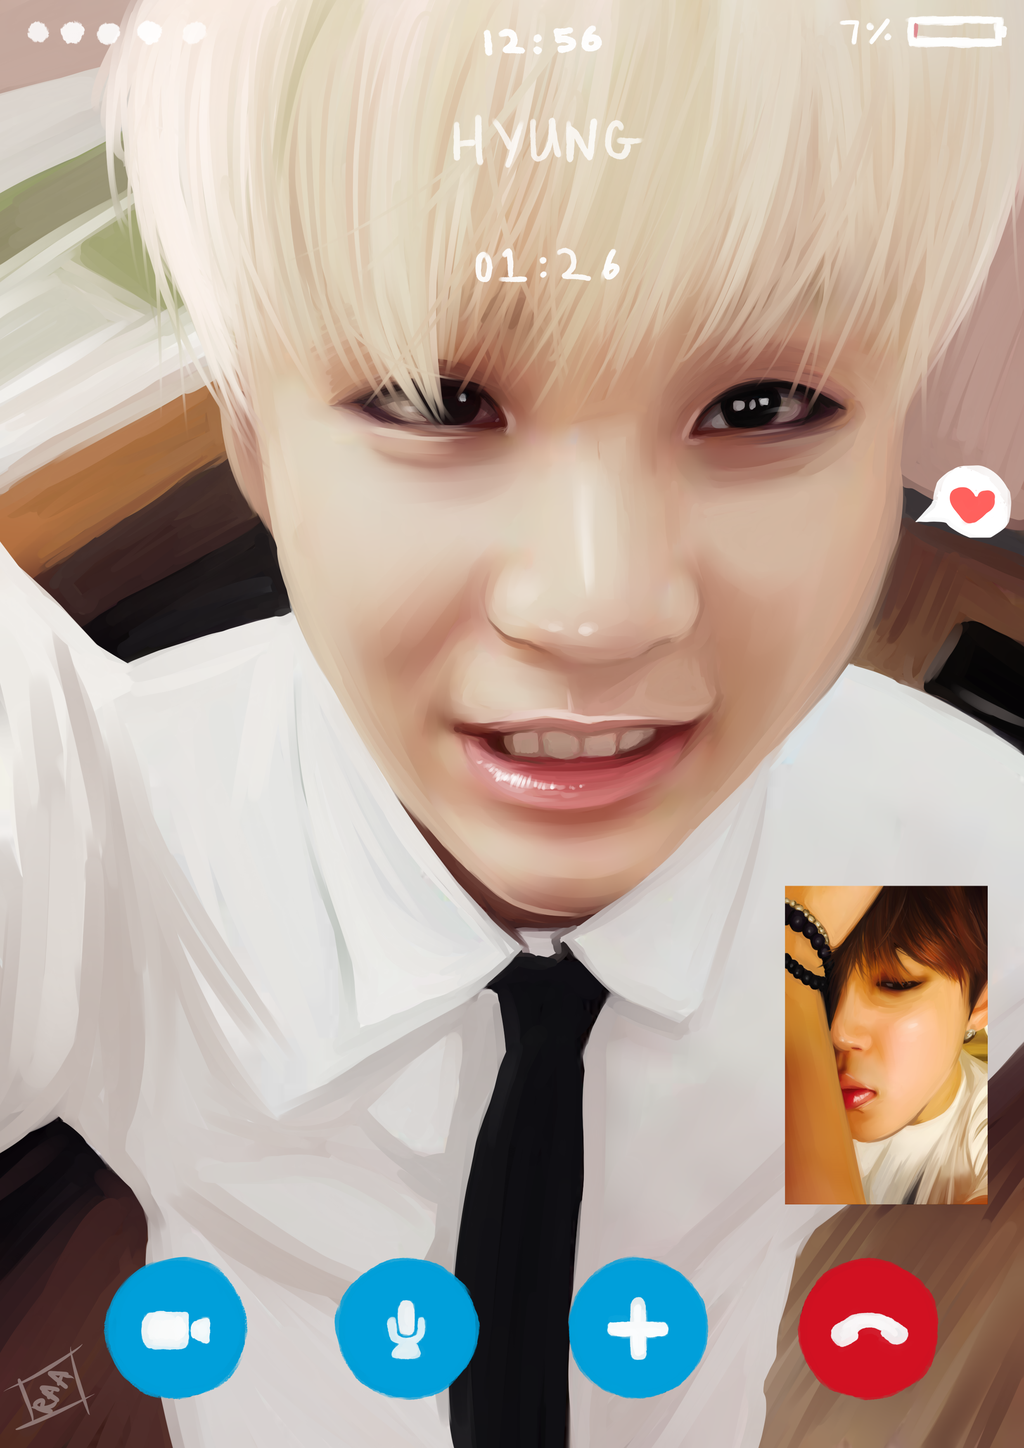 Yoonmin On Skype By Cosmicpens